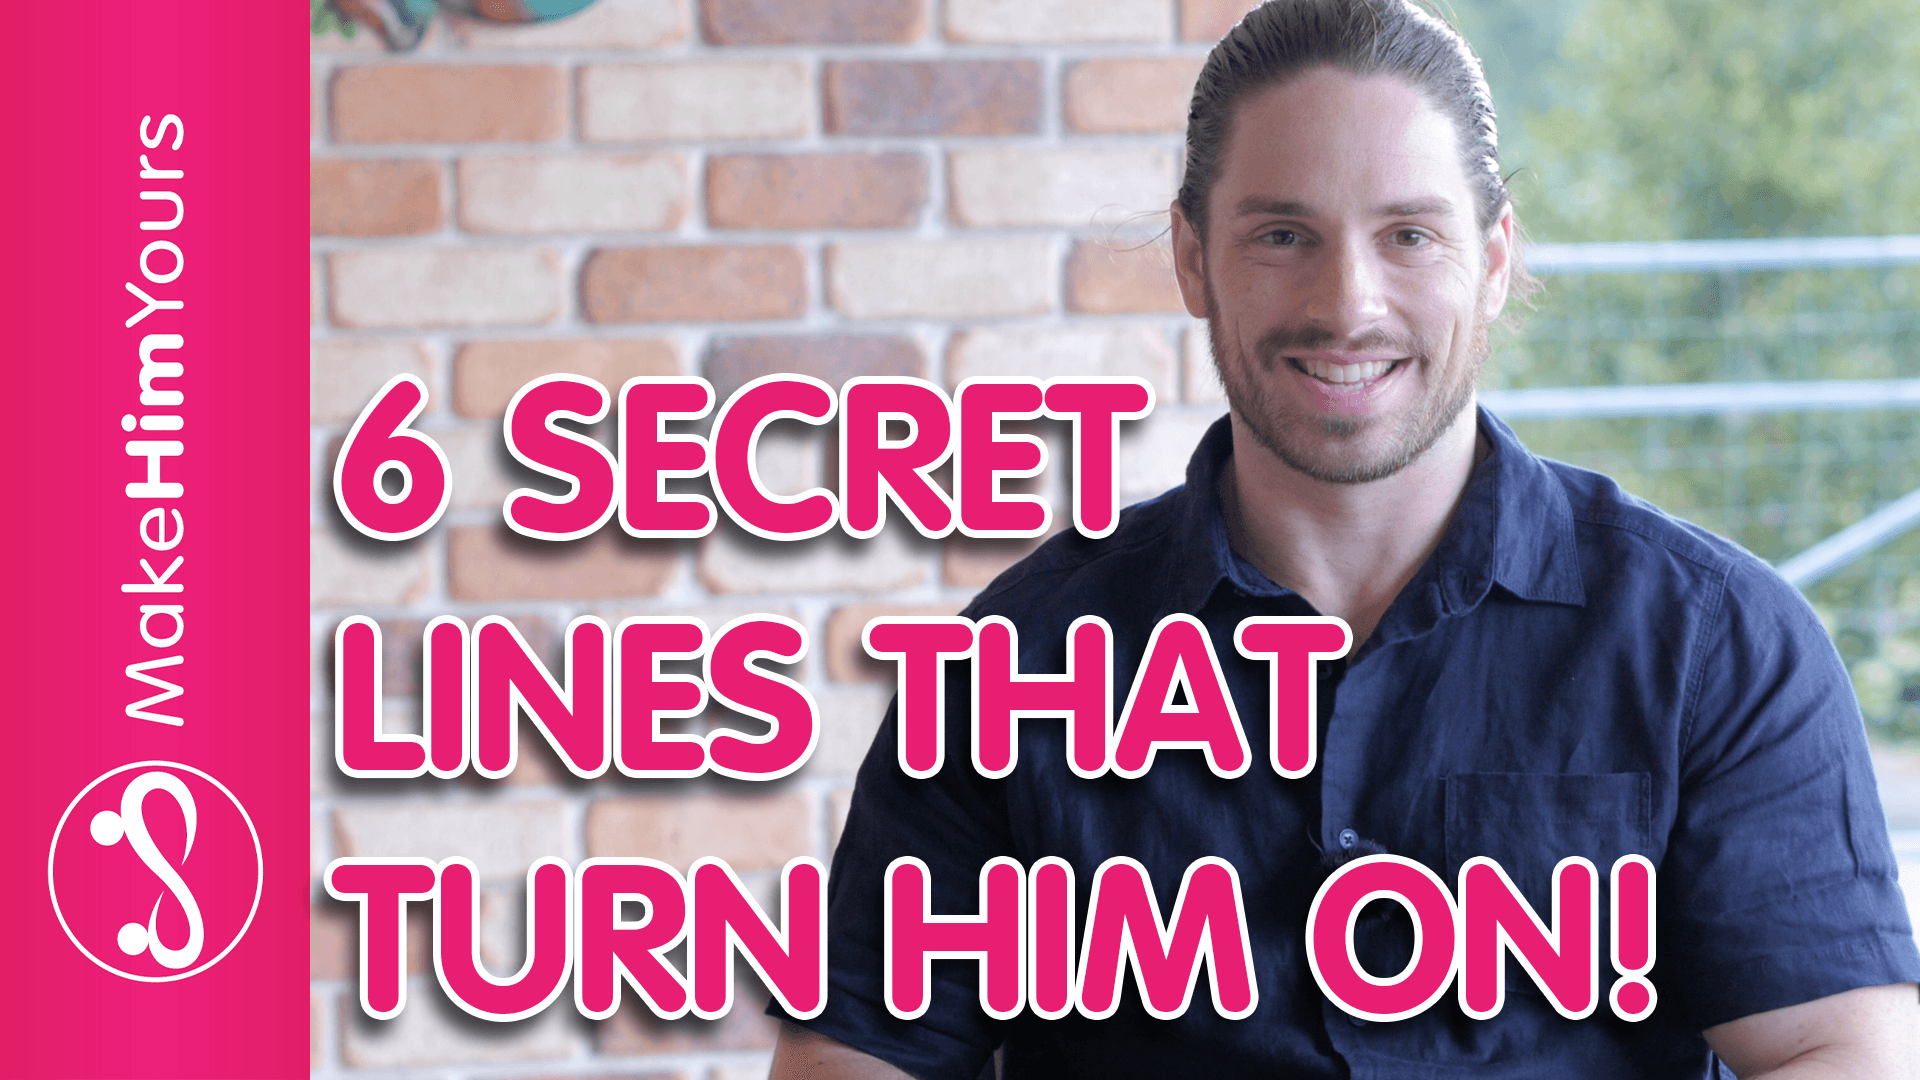 Things That Turn Guys On [6 Secret Lines Men LOVE To Hear]